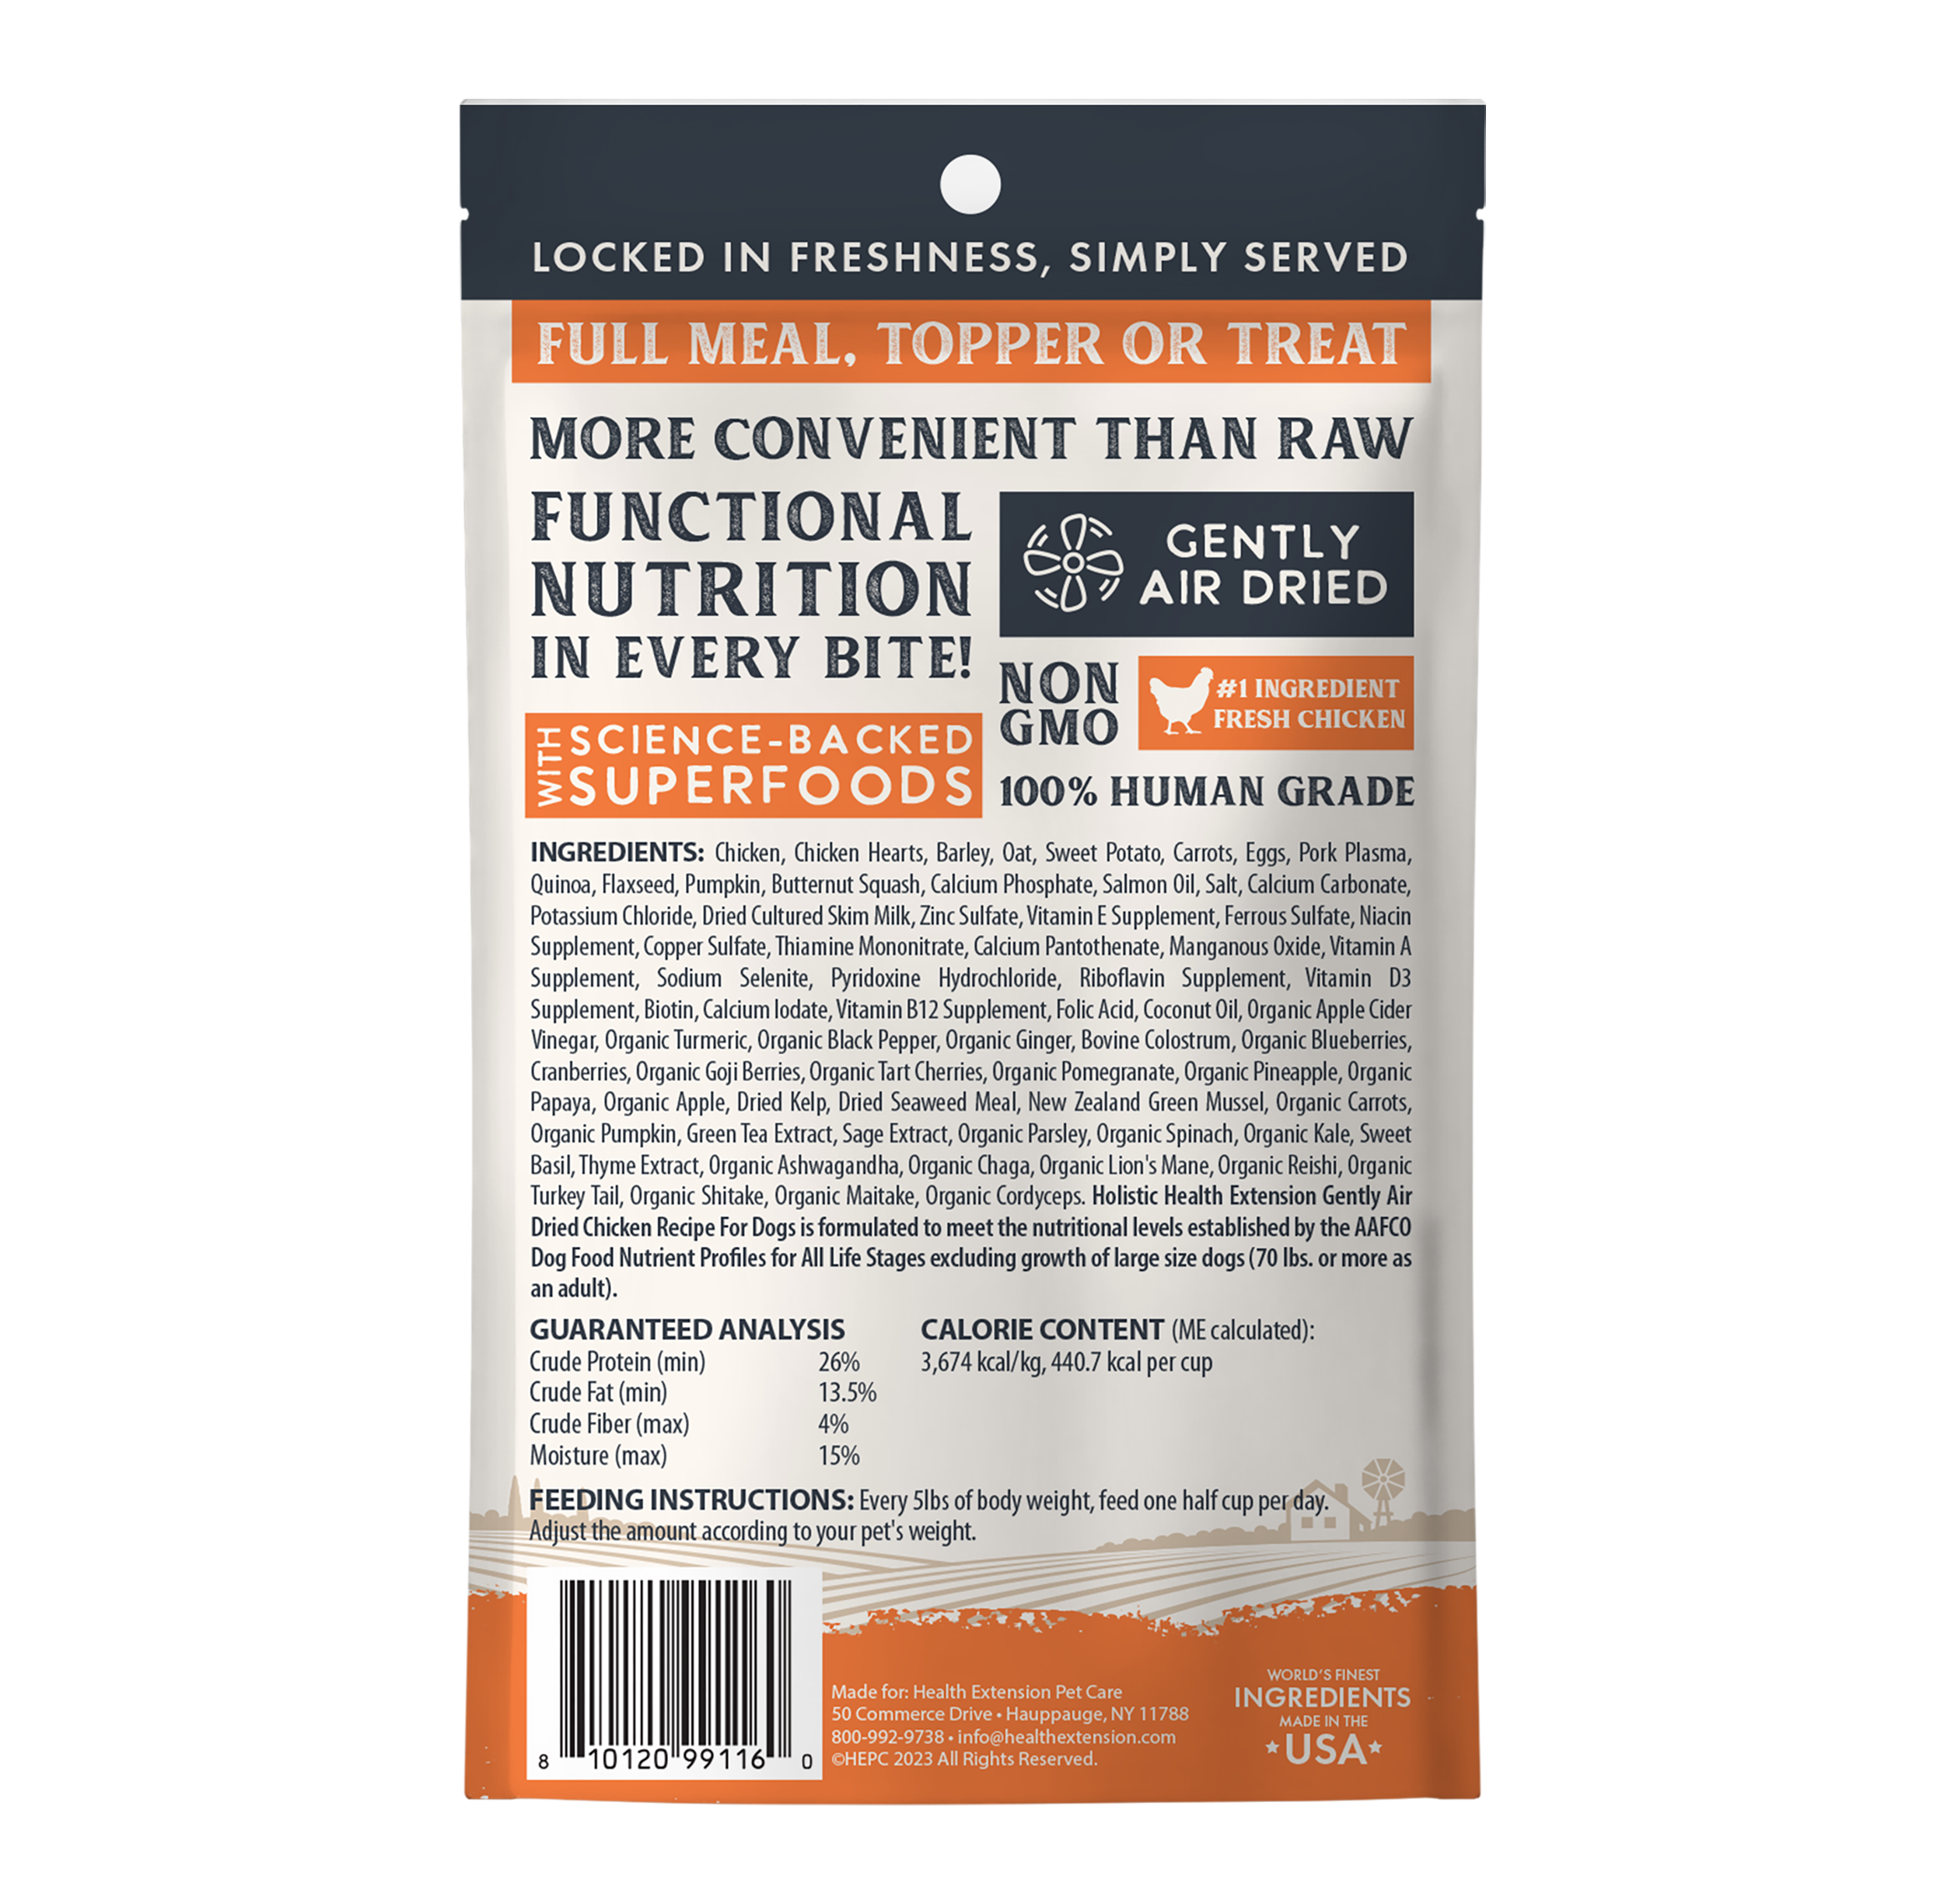 Nutritional info and feeding guide on Health Extension Chicken dog food for all dog stages.